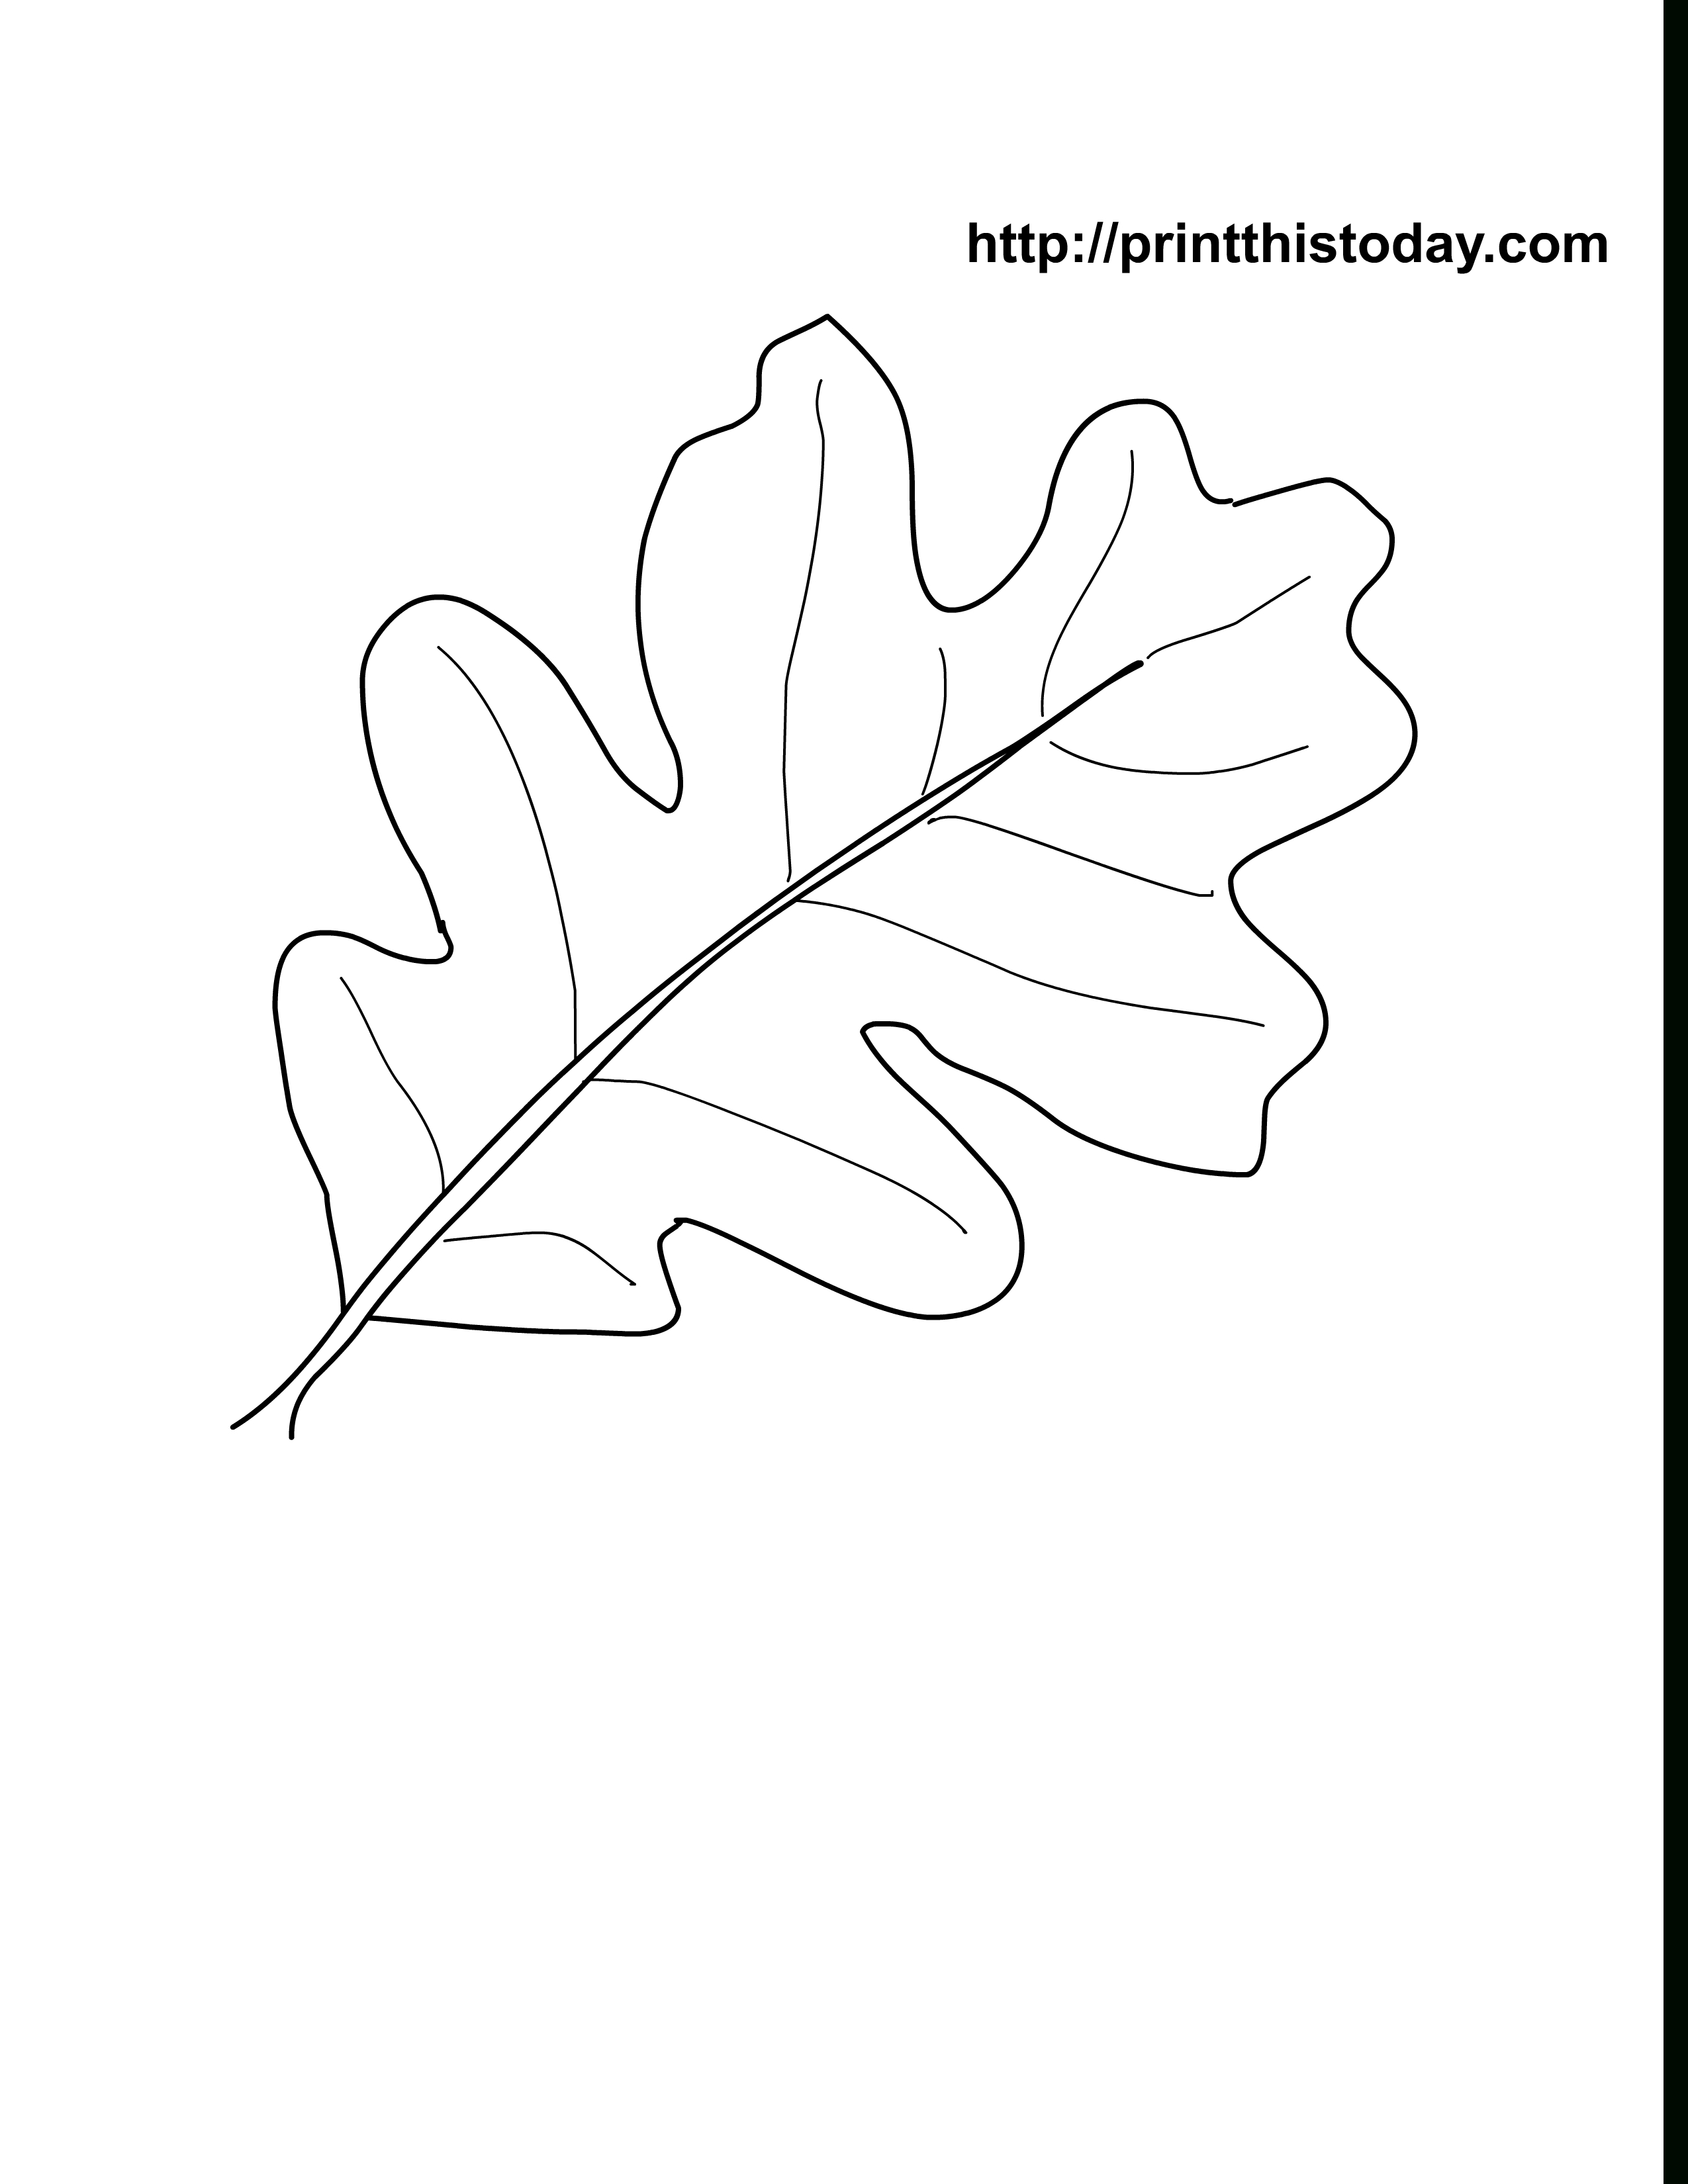 Oak Leaves Coloring Pages Printable | Craft Ideas | Pinterest - Free Printable Leaf Template